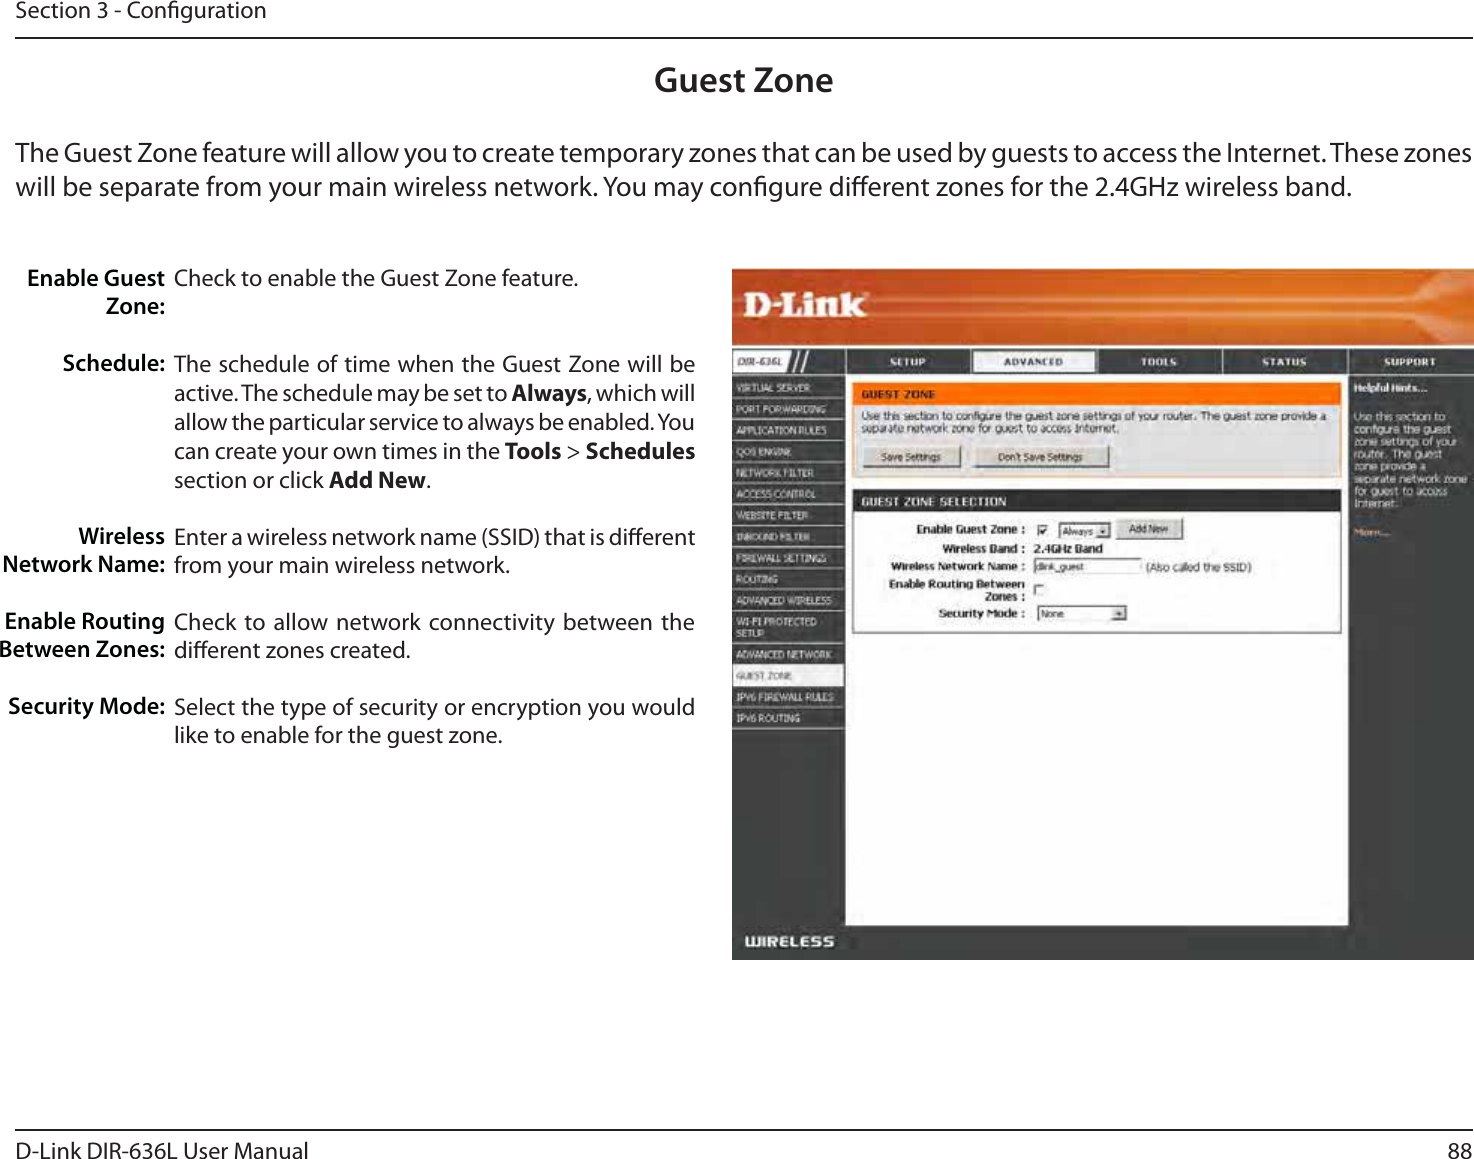 88D-Link DIR-636L User ManualSection 3 - CongurationGuest ZoneCheck to enable the Guest Zone feature. The schedule of time when the Guest Zone will be active. The schedule may be set to Always, which will allow the particular service to always be enabled. You can create your own times in the Tools &gt; Schedules section or click Add New.Enter a wireless network name (SSID) that is dierent from your main wireless network.Check to allow network connectivity between the dierent zones created. Select the type of security or encryption you would like to enable for the guest zone.  Enable Guest Zone:Schedule:Wireless Network Name:Enable Routing Between Zones:Security Mode:The Guest Zone feature will allow you to create temporary zones that can be used by guests to access the Internet. These zones will be separate from your main wireless network. You may congure dierent zones for the 2.4GHz wireless band.